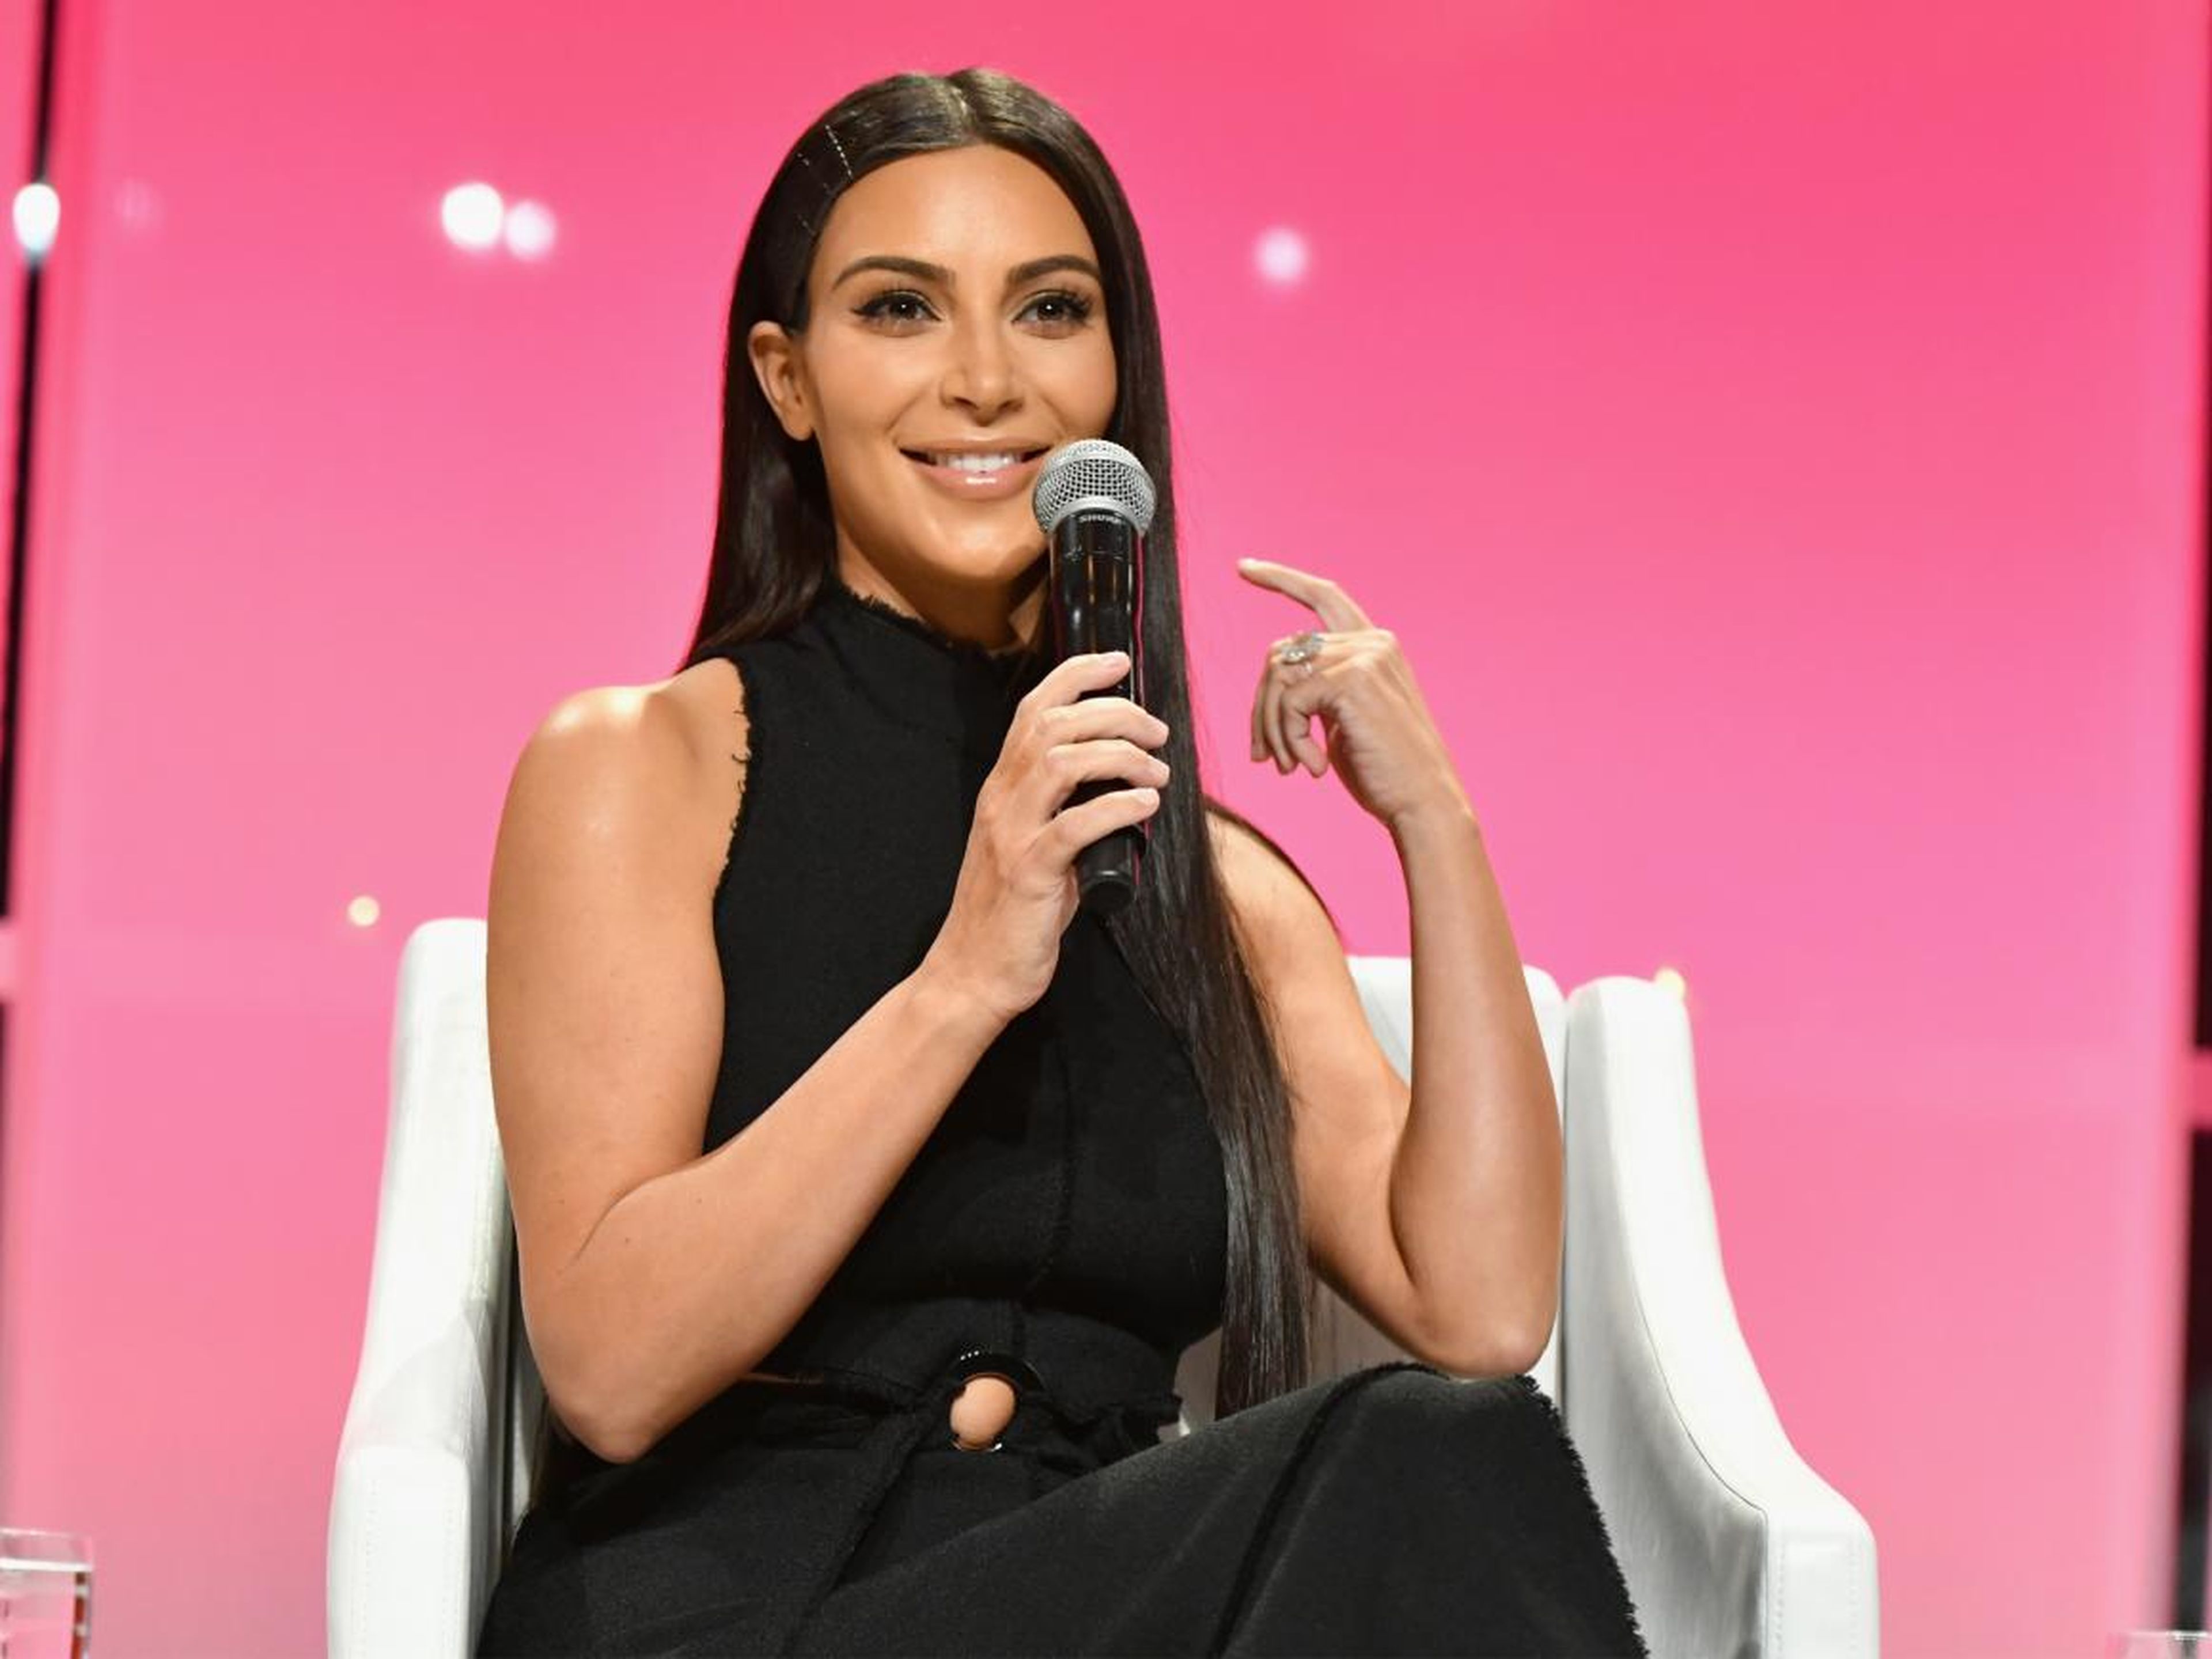 Kim Kardashian West has had a career spanning multiple industries, and she's eager to add "law" to her list.